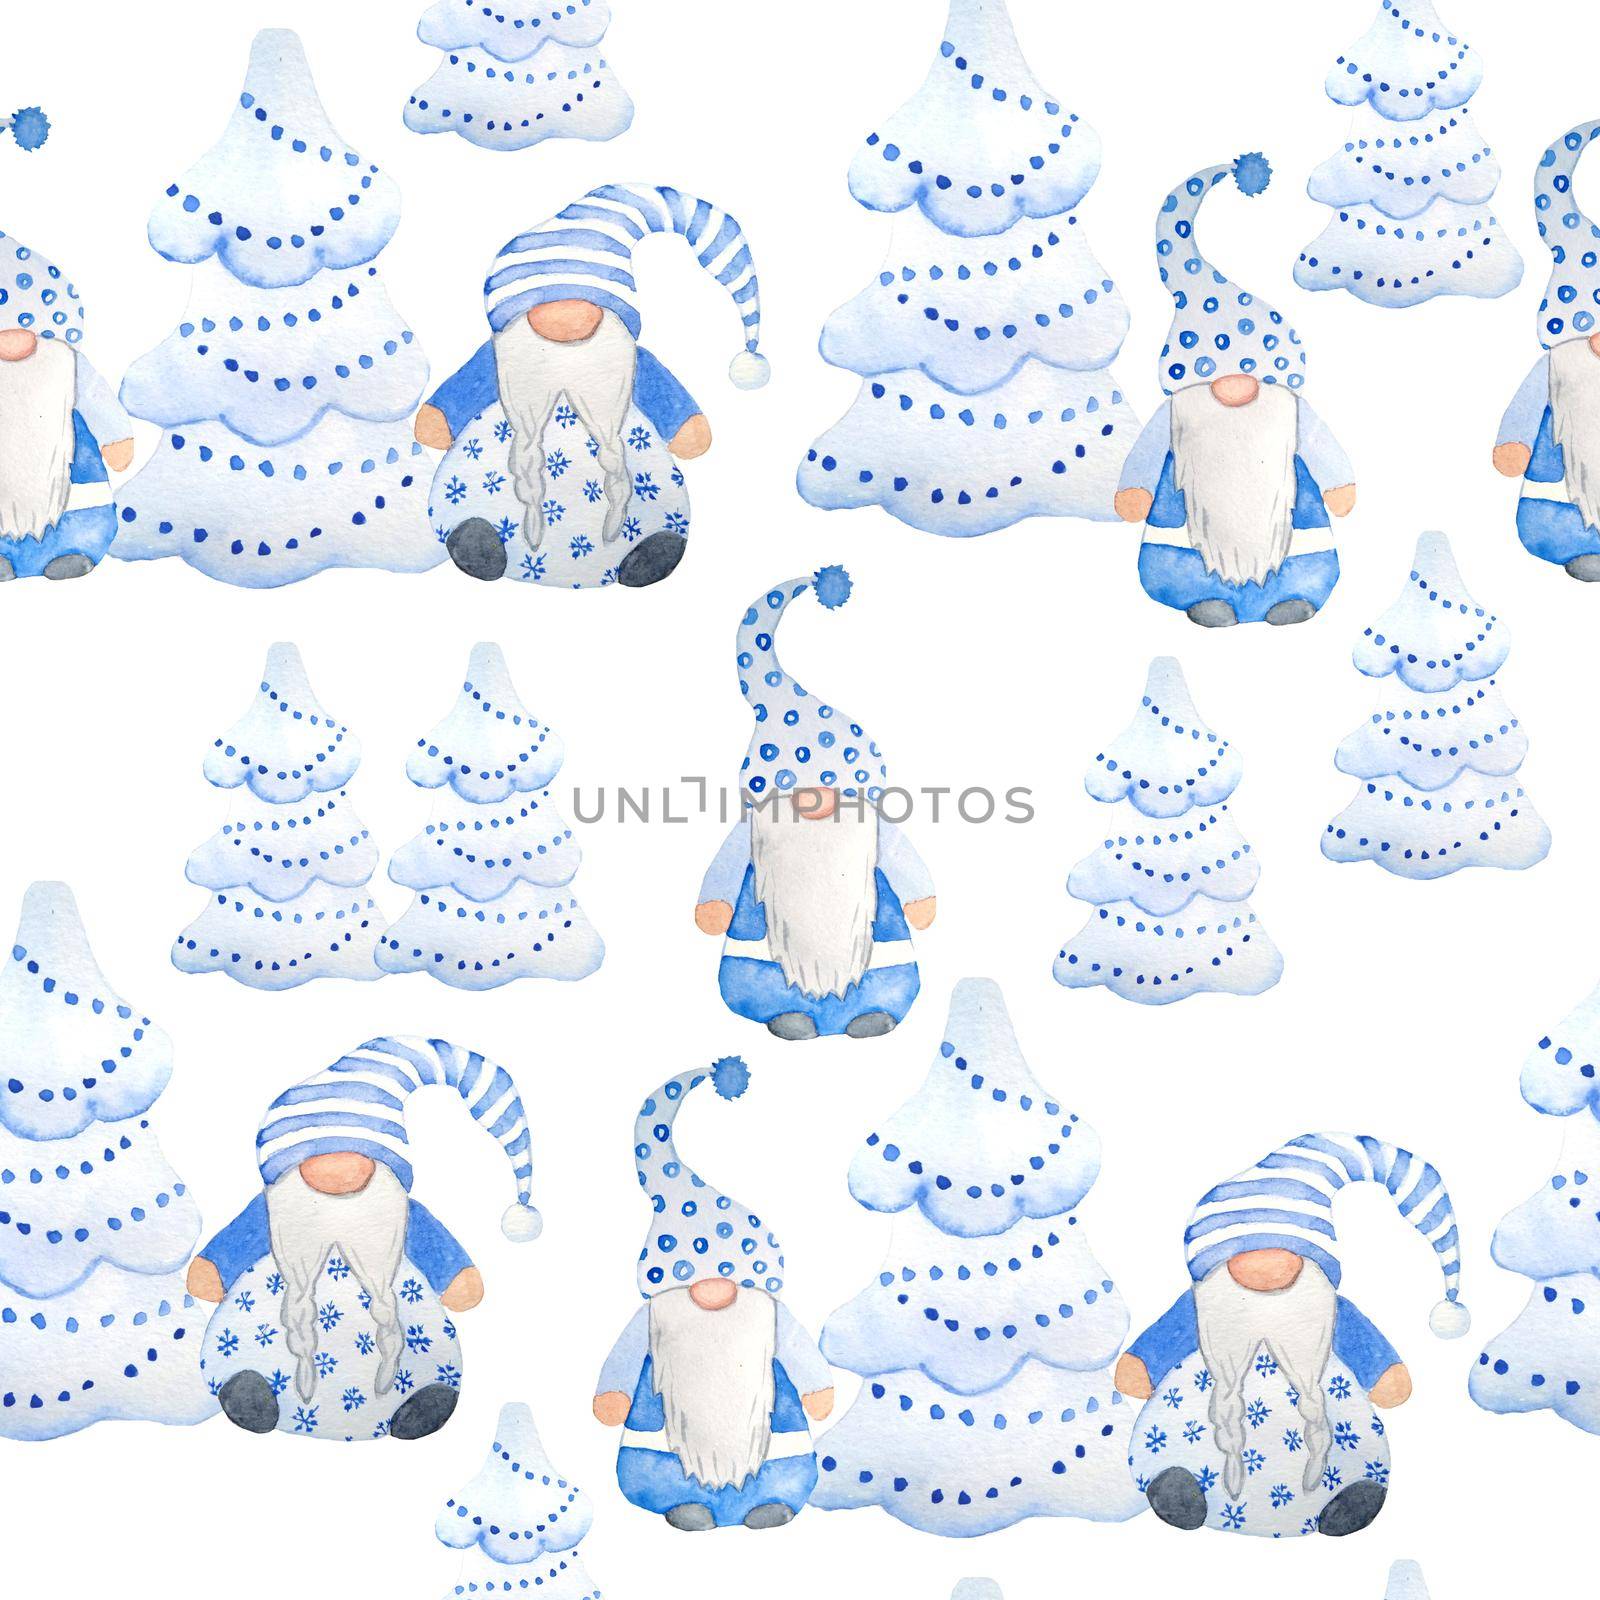 Watercolor hand drawn seamless pattern nordic scandinavian gnomes for christmas decor tree. New year illustration in blue grey Christmas fir tree. Funny winter character north swedish elf in hat beard. Greeting card